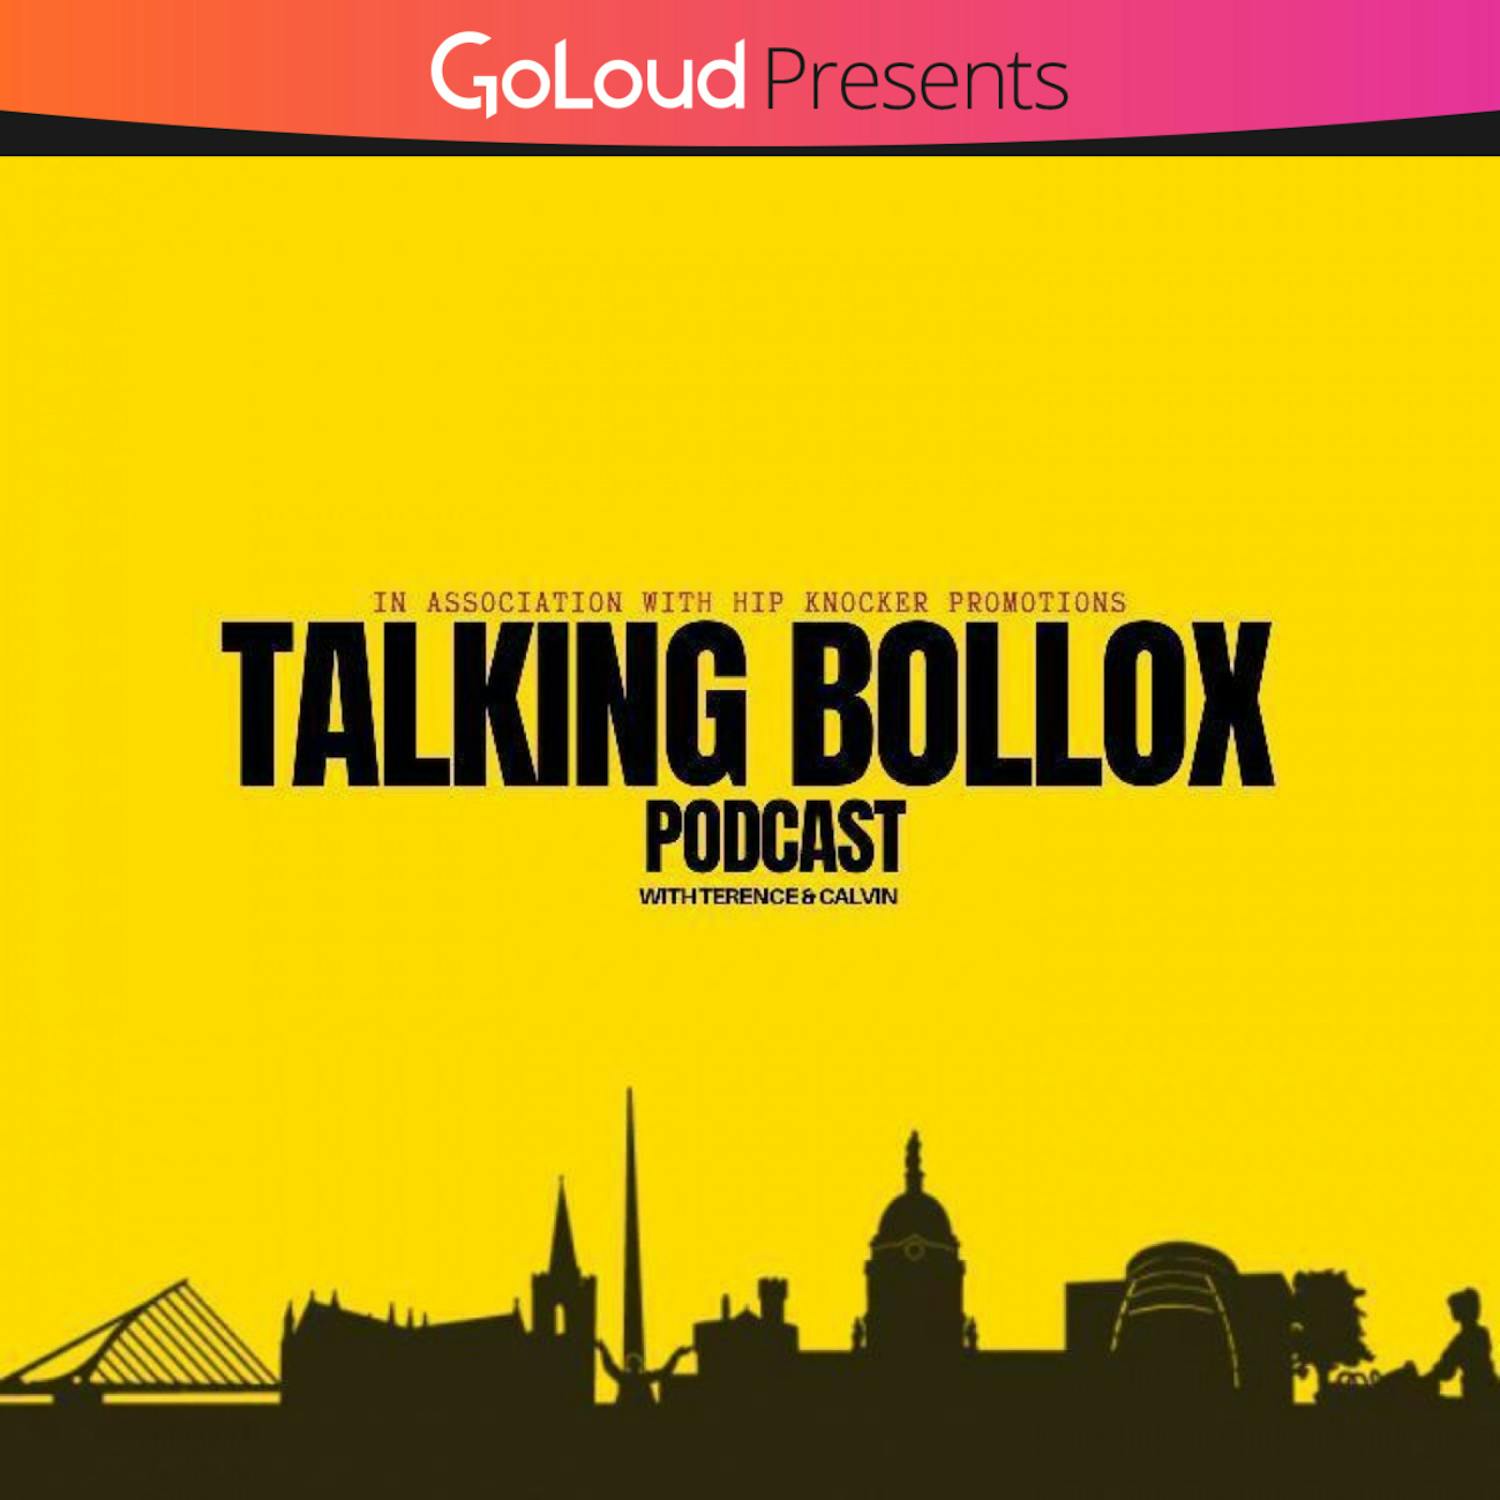 Talking Bollox Podcast podcast show image